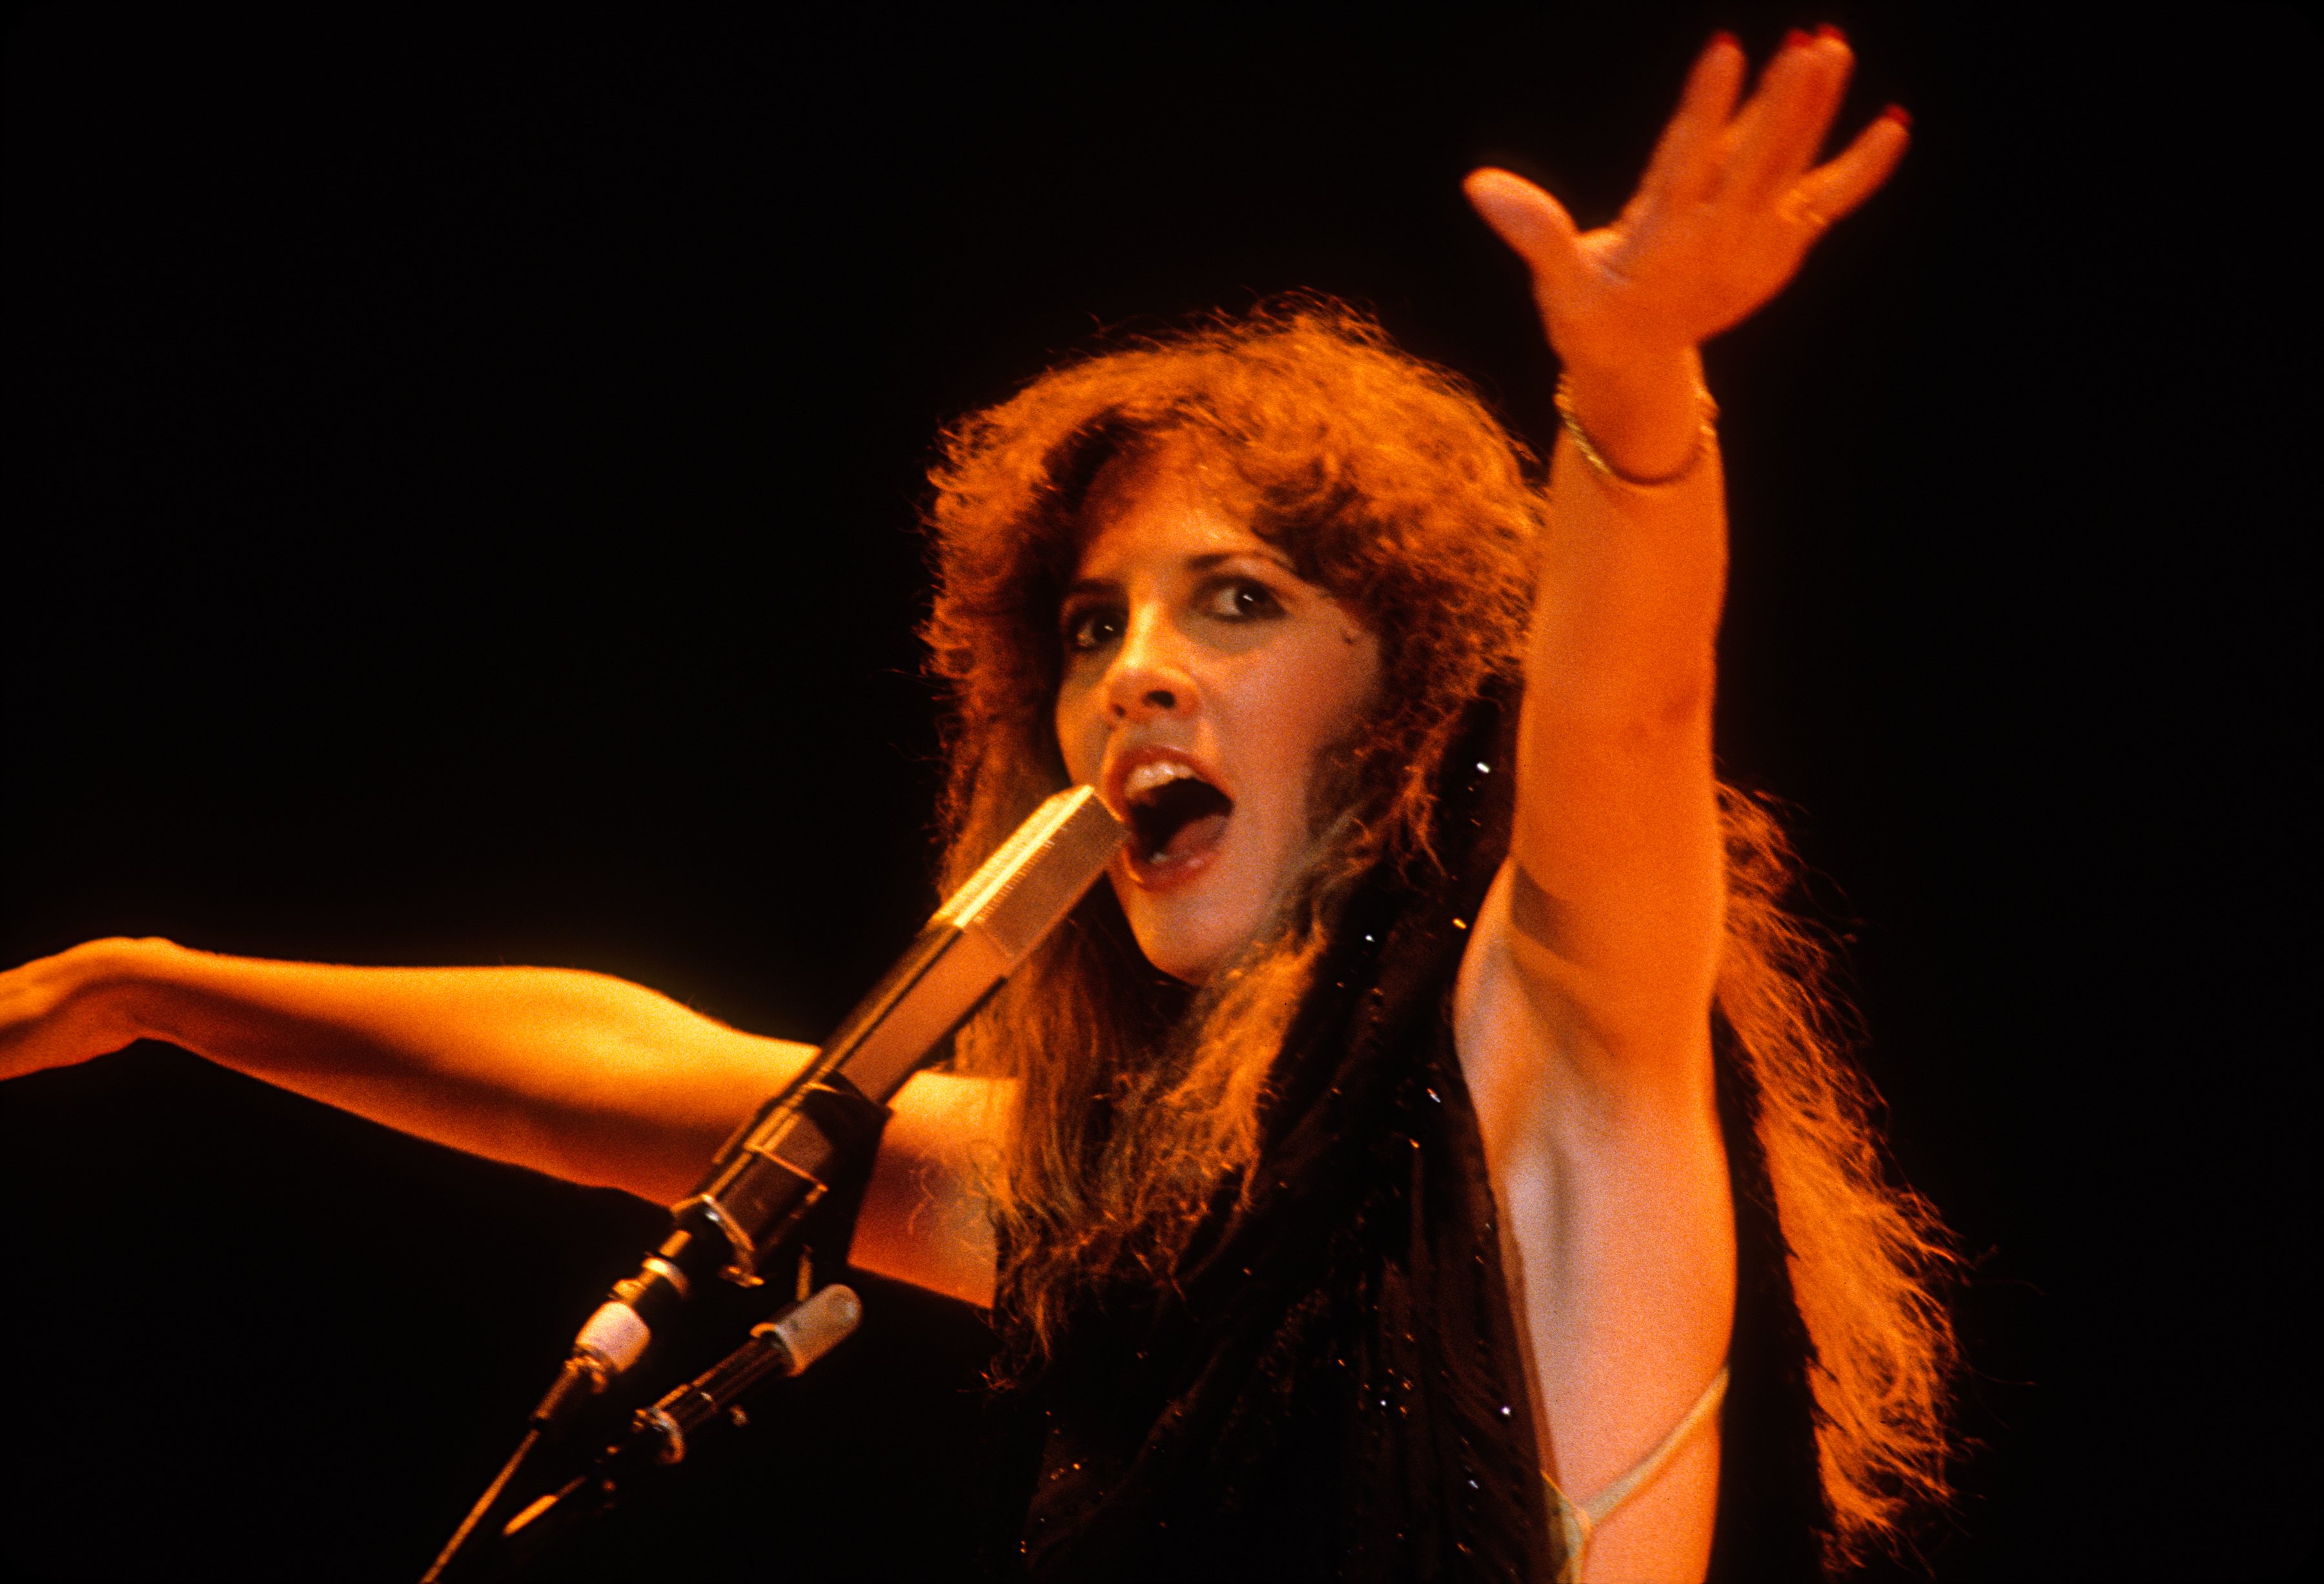 Fleetwood Mac's Stevie Nicks wears a black halter and sings into a microphone.